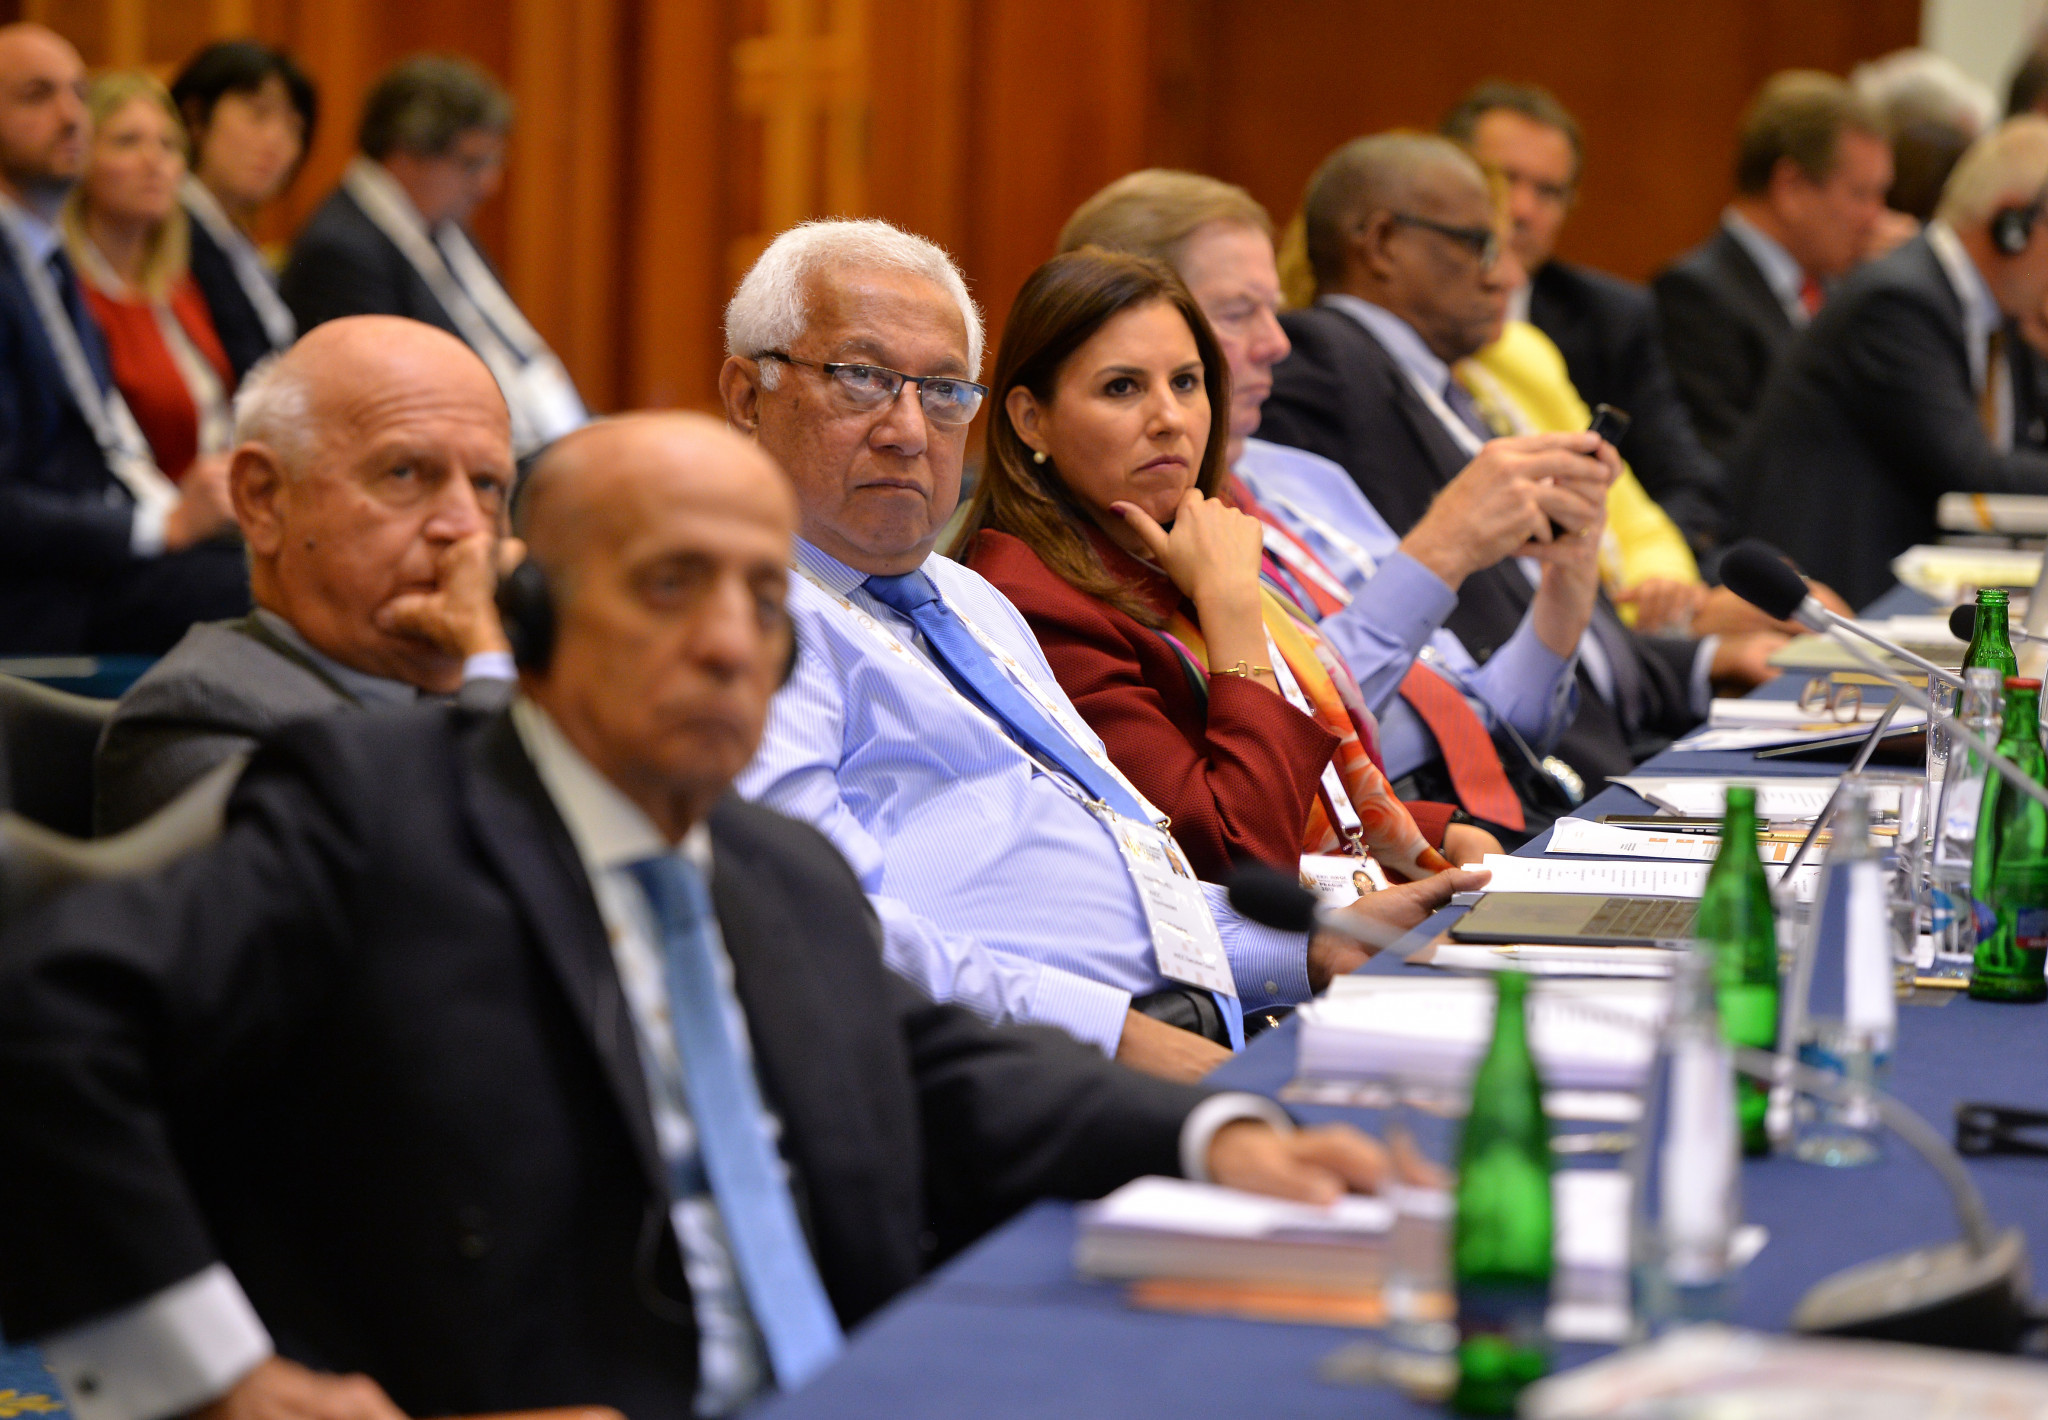 FINA President Julio Maglione was among others in attendance for the ANOC meeting today ©Getty Images